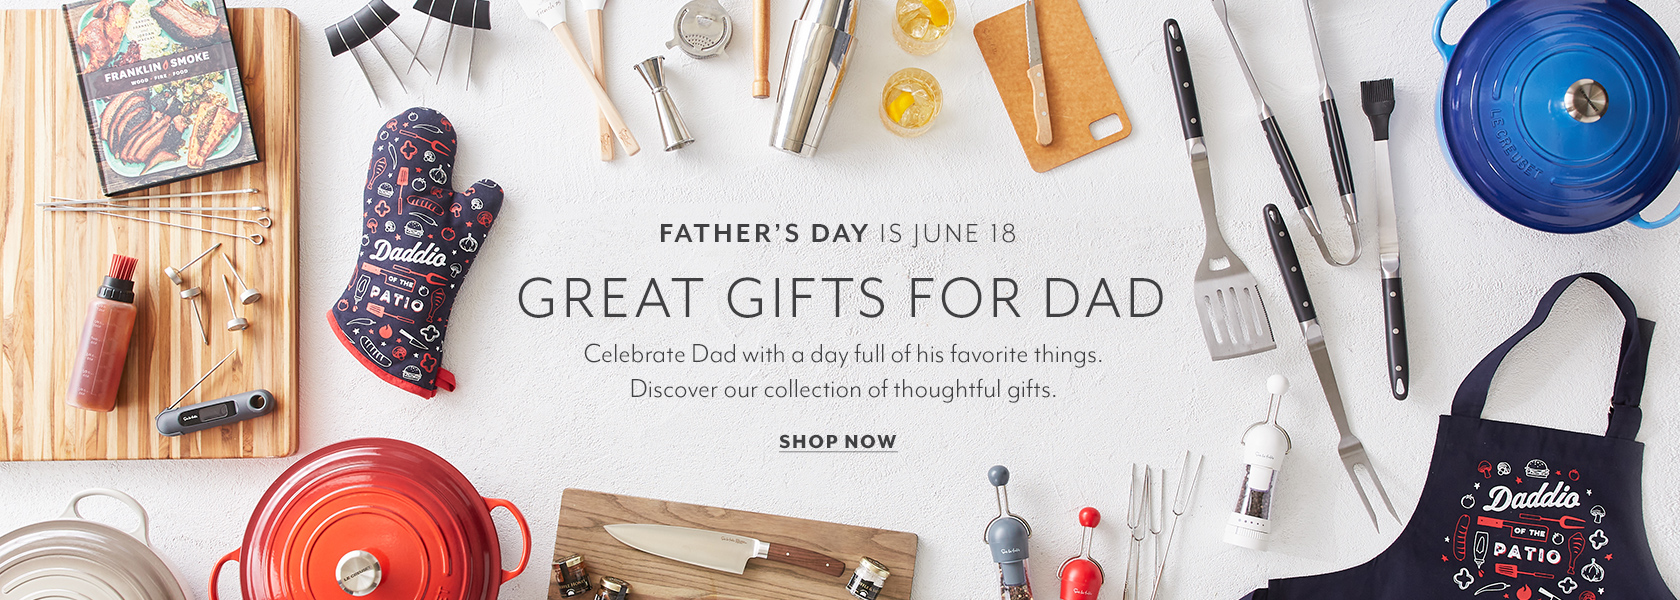 Father's Day is June 18. Great Gifts for Dad. Celebrate Dad with a day full of his favorite things. Discover our collection of thoughtful gifts. Shop now.